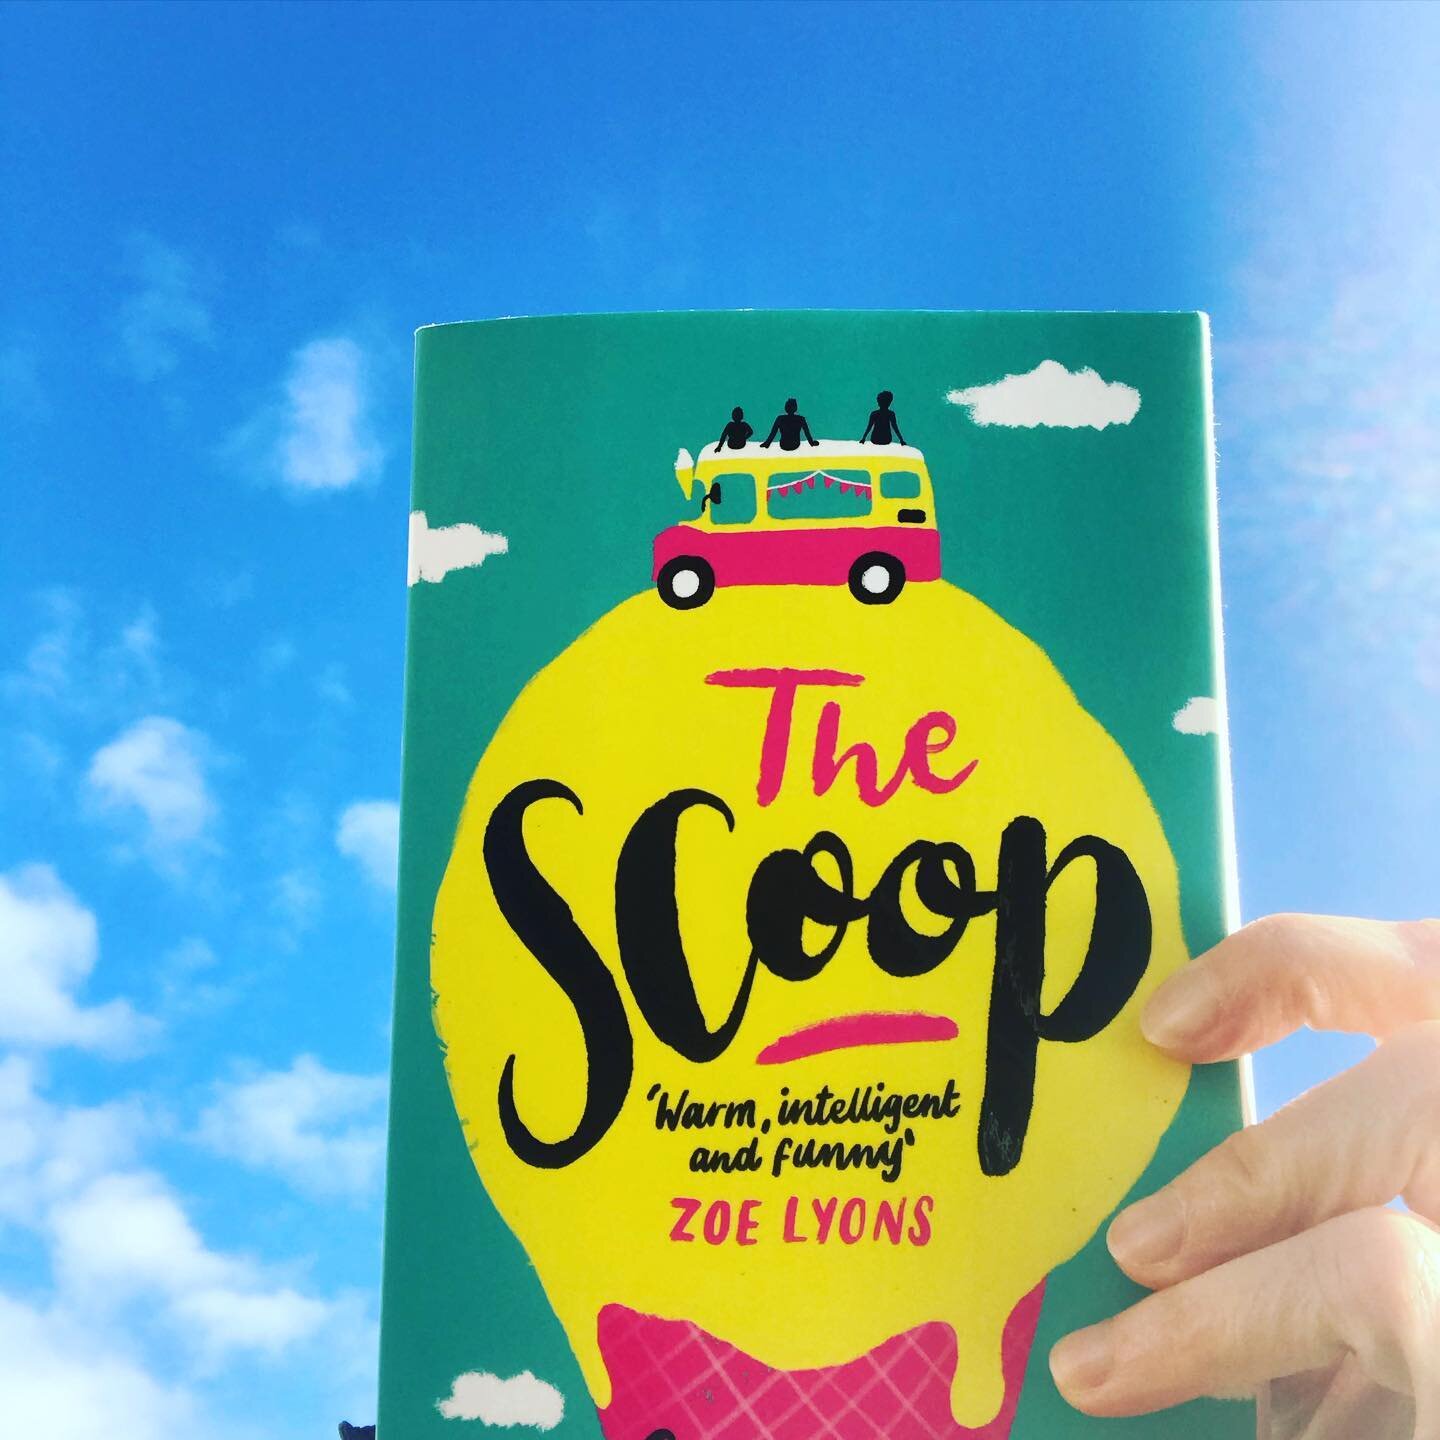 Such a beautiful day to catch up on reading in the sunshine by the sea. I can&rsquo;t believe that it&rsquo;s nearly 1 year now since #TheScoop was published! And what a year it&rsquo;s been! One day I might even get out into some bookshops to see it